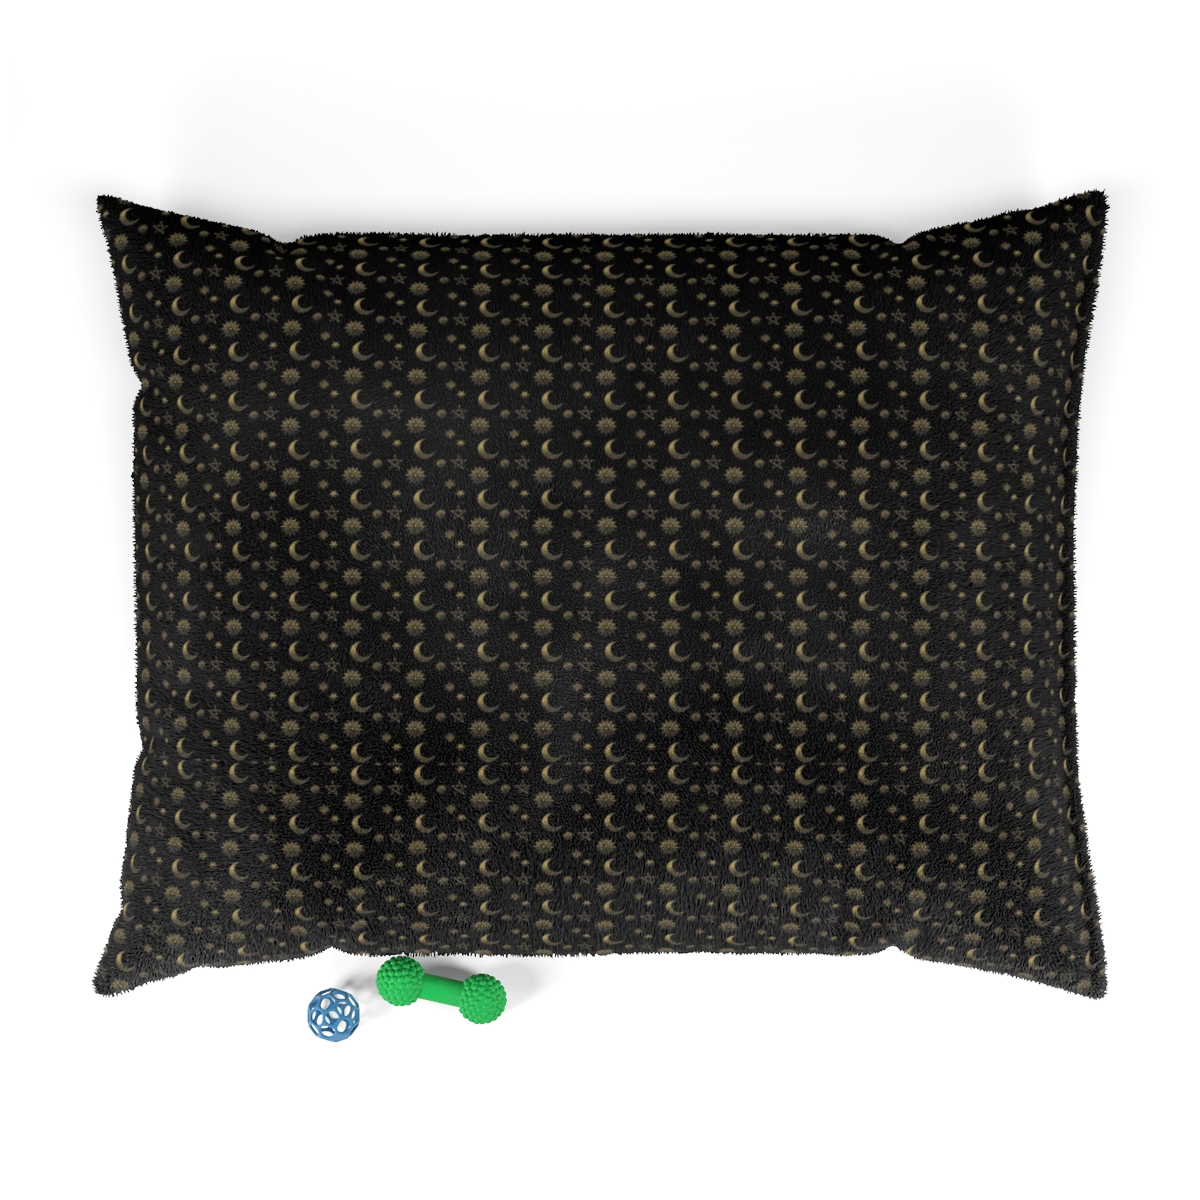 "Cosmic Gold" Pet Bed product thumbnail image